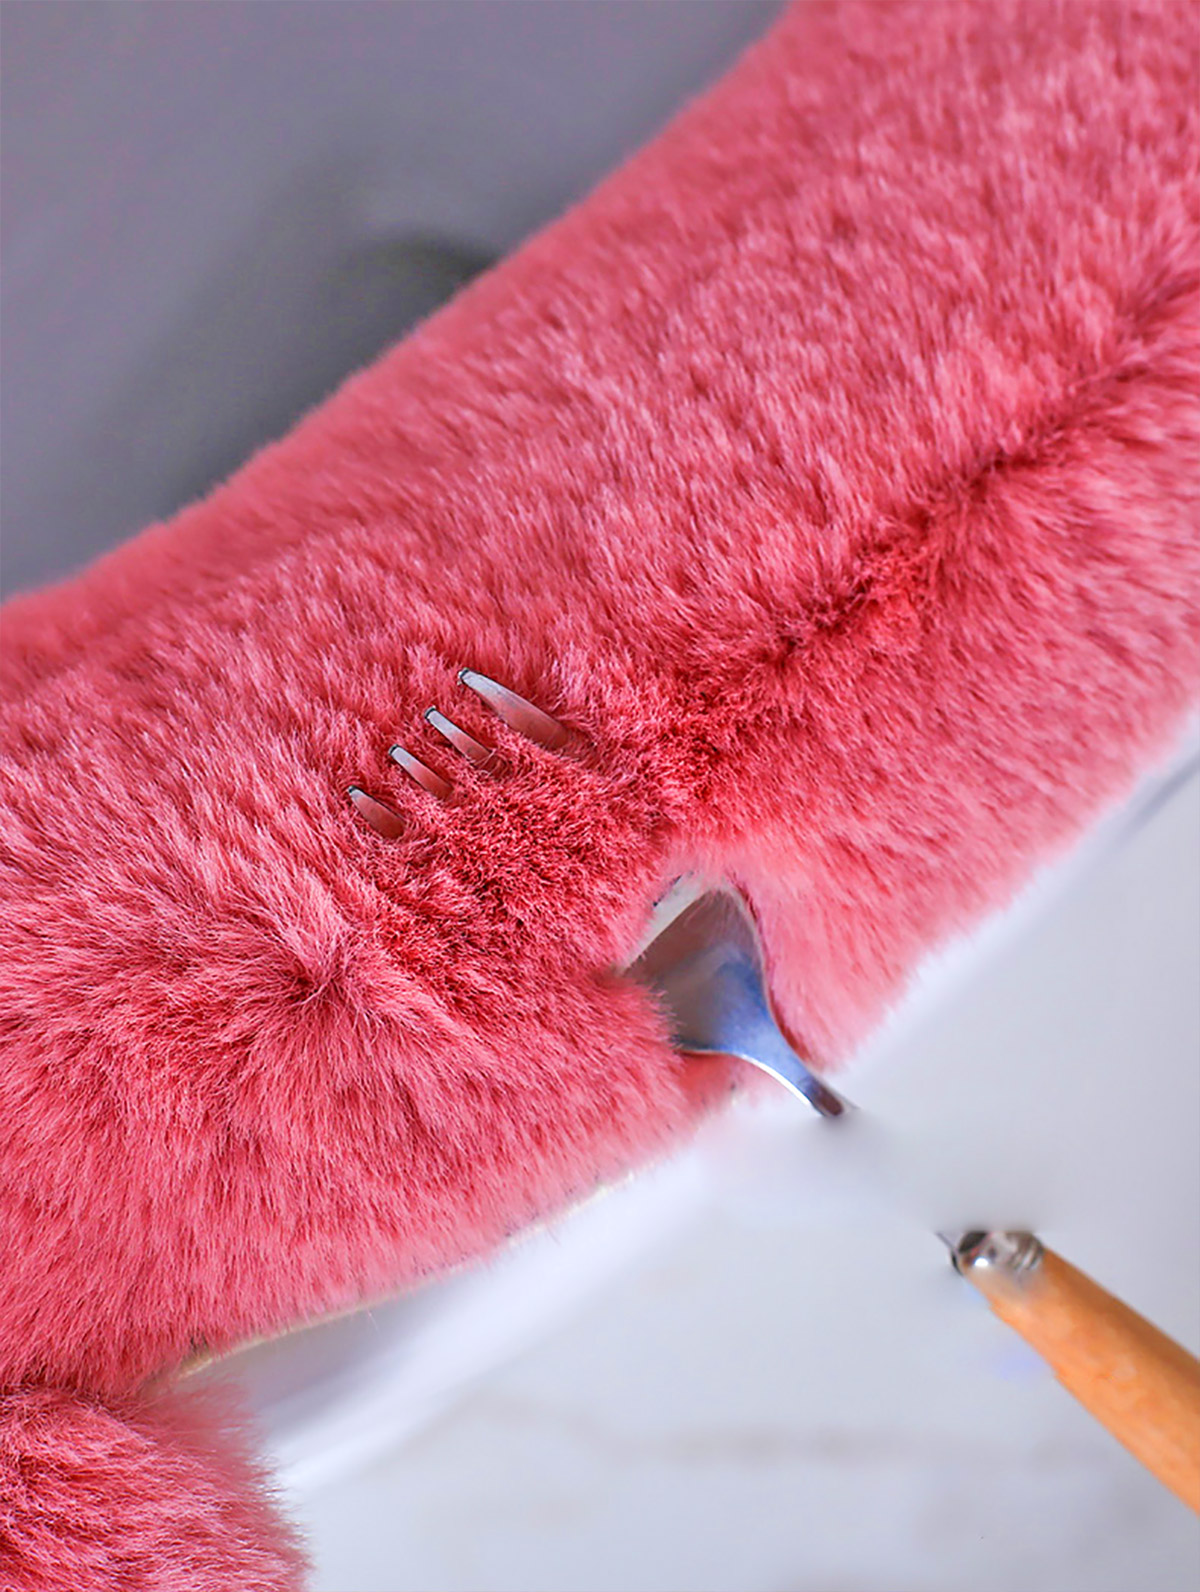 Fluffy Toilet Seat Cover With Phone Pocket Holder and Fluffy Handle